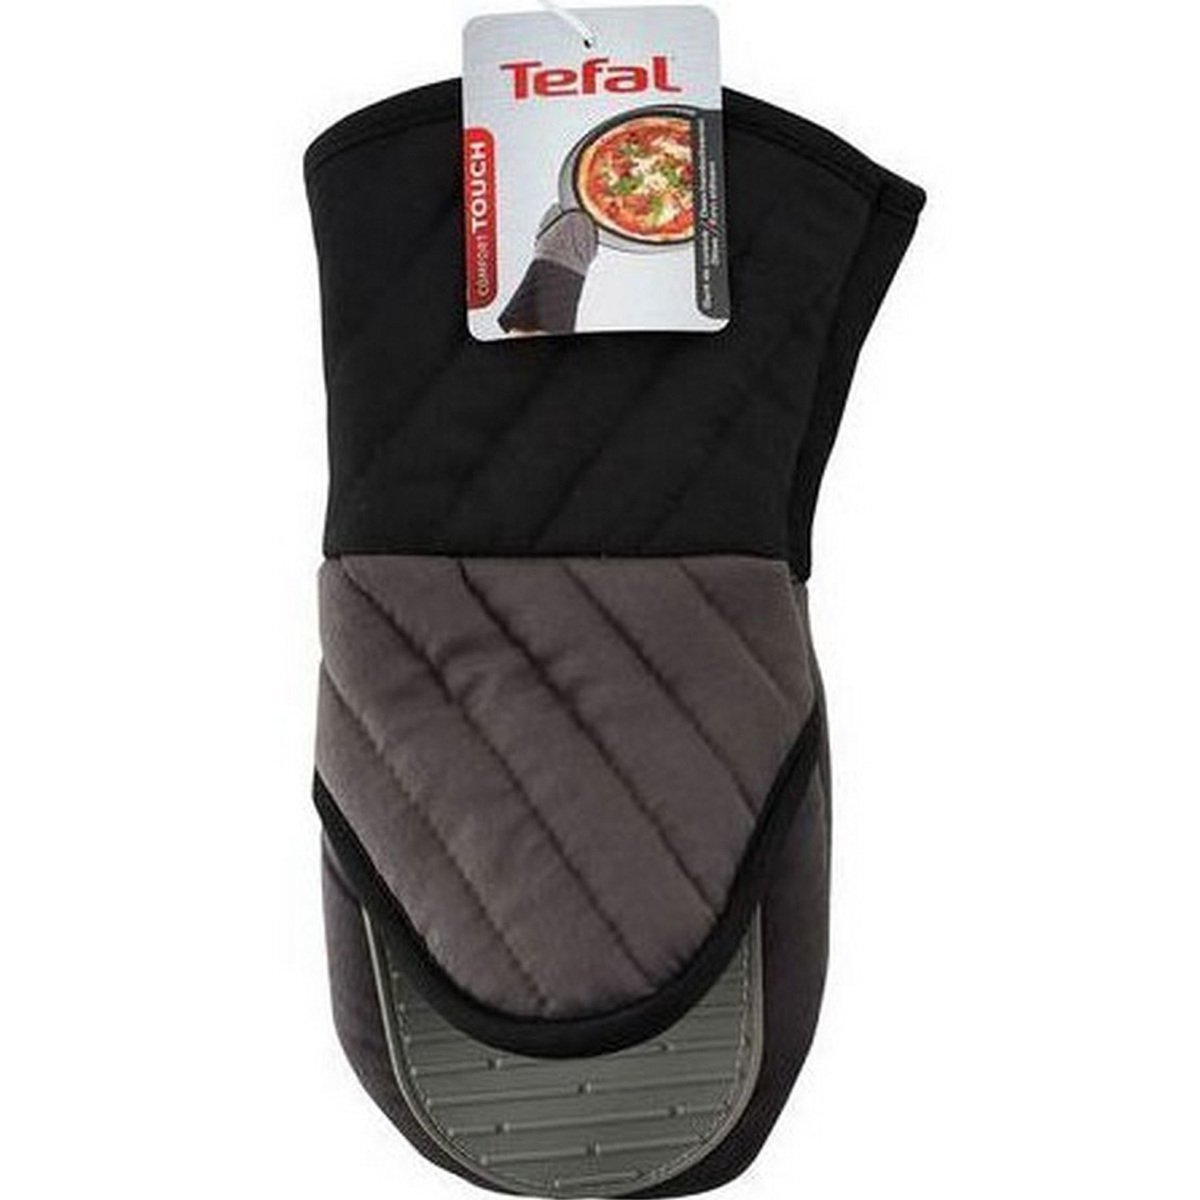 Tefal Comfort Touch Oven Glove K0690514